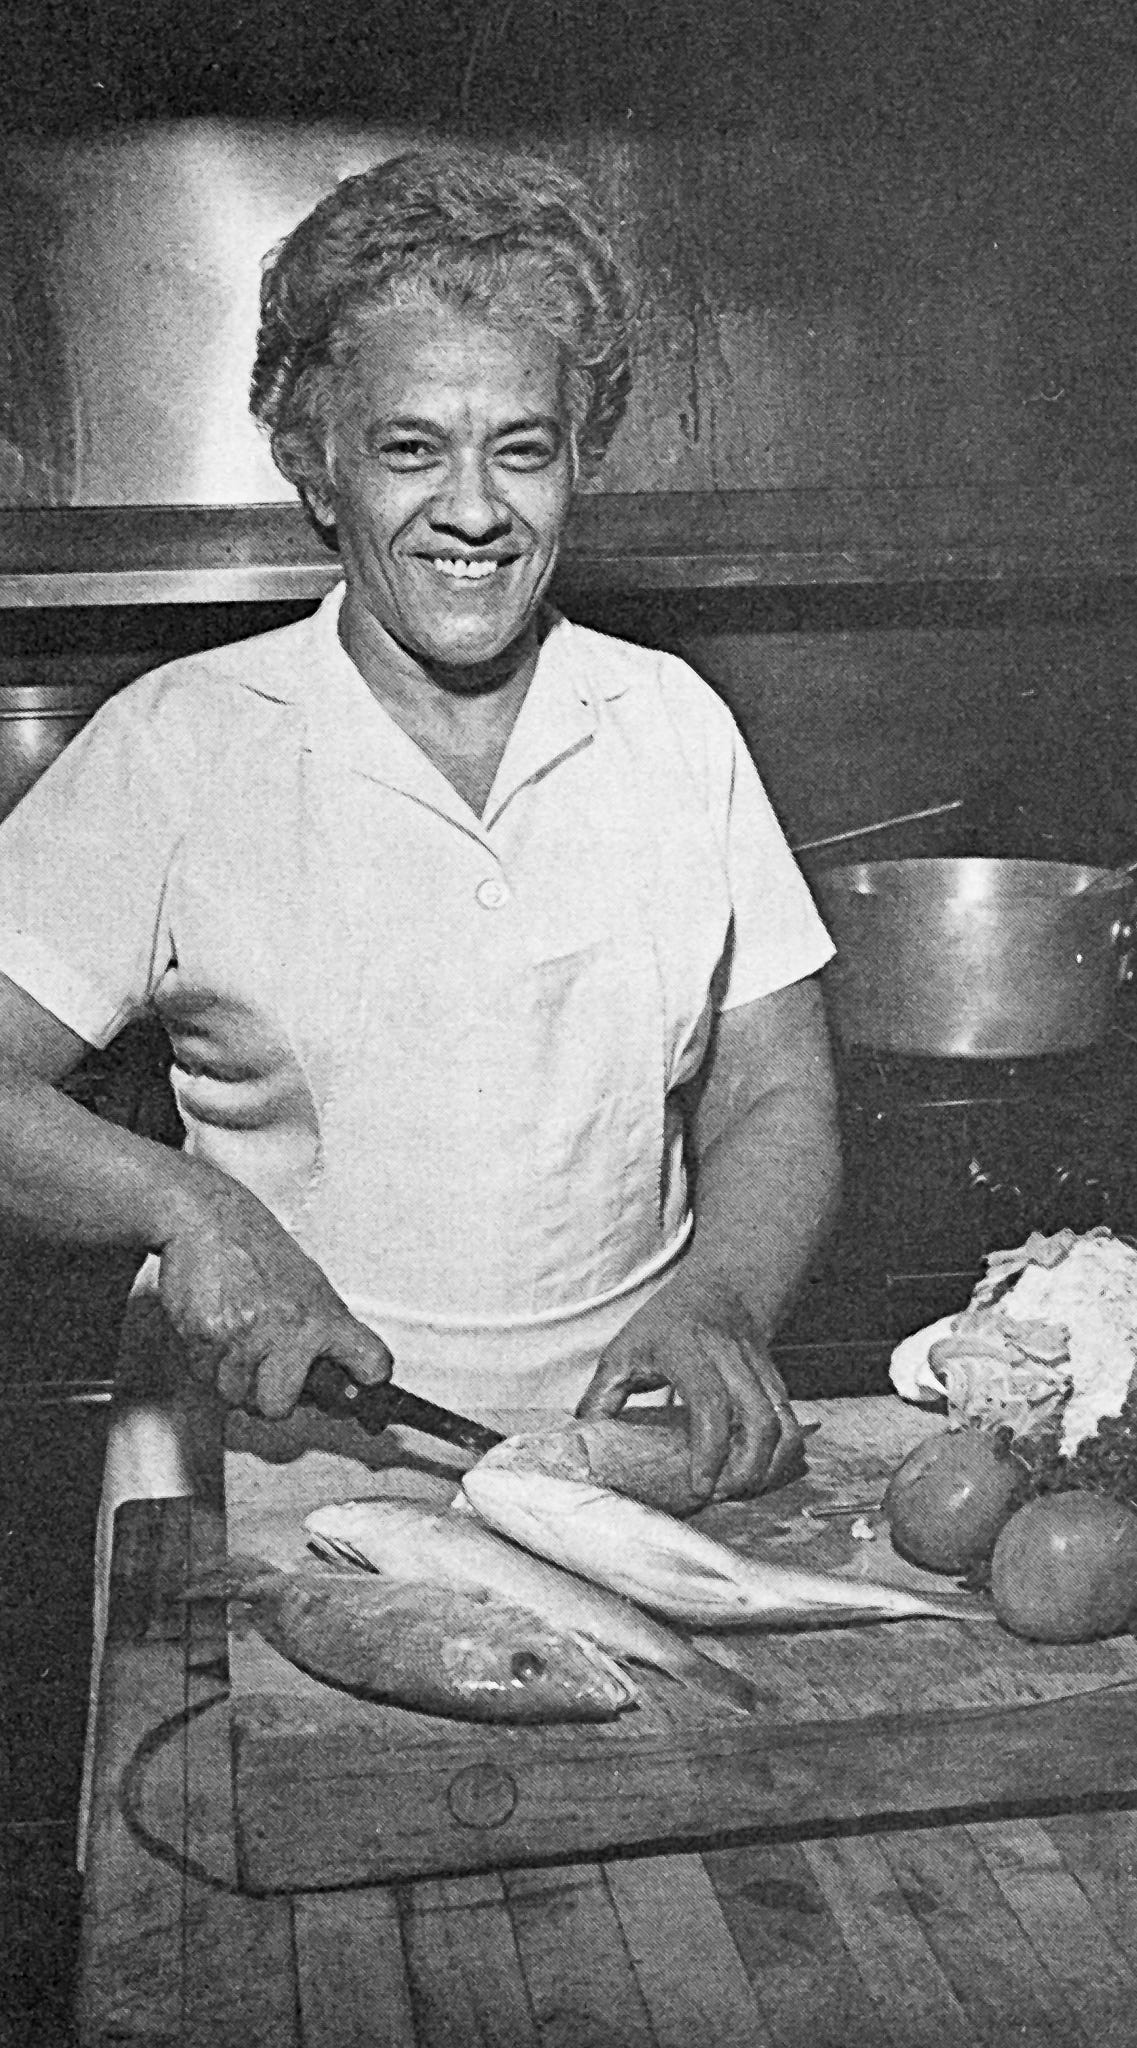 Legendary Creole chef, activist and art collector Leah Chase was featured in the 1978 cookbook "Creole Feast." Chase wrote the foreword to a new edition of the book from UNO Press shortly before she died in 2019.